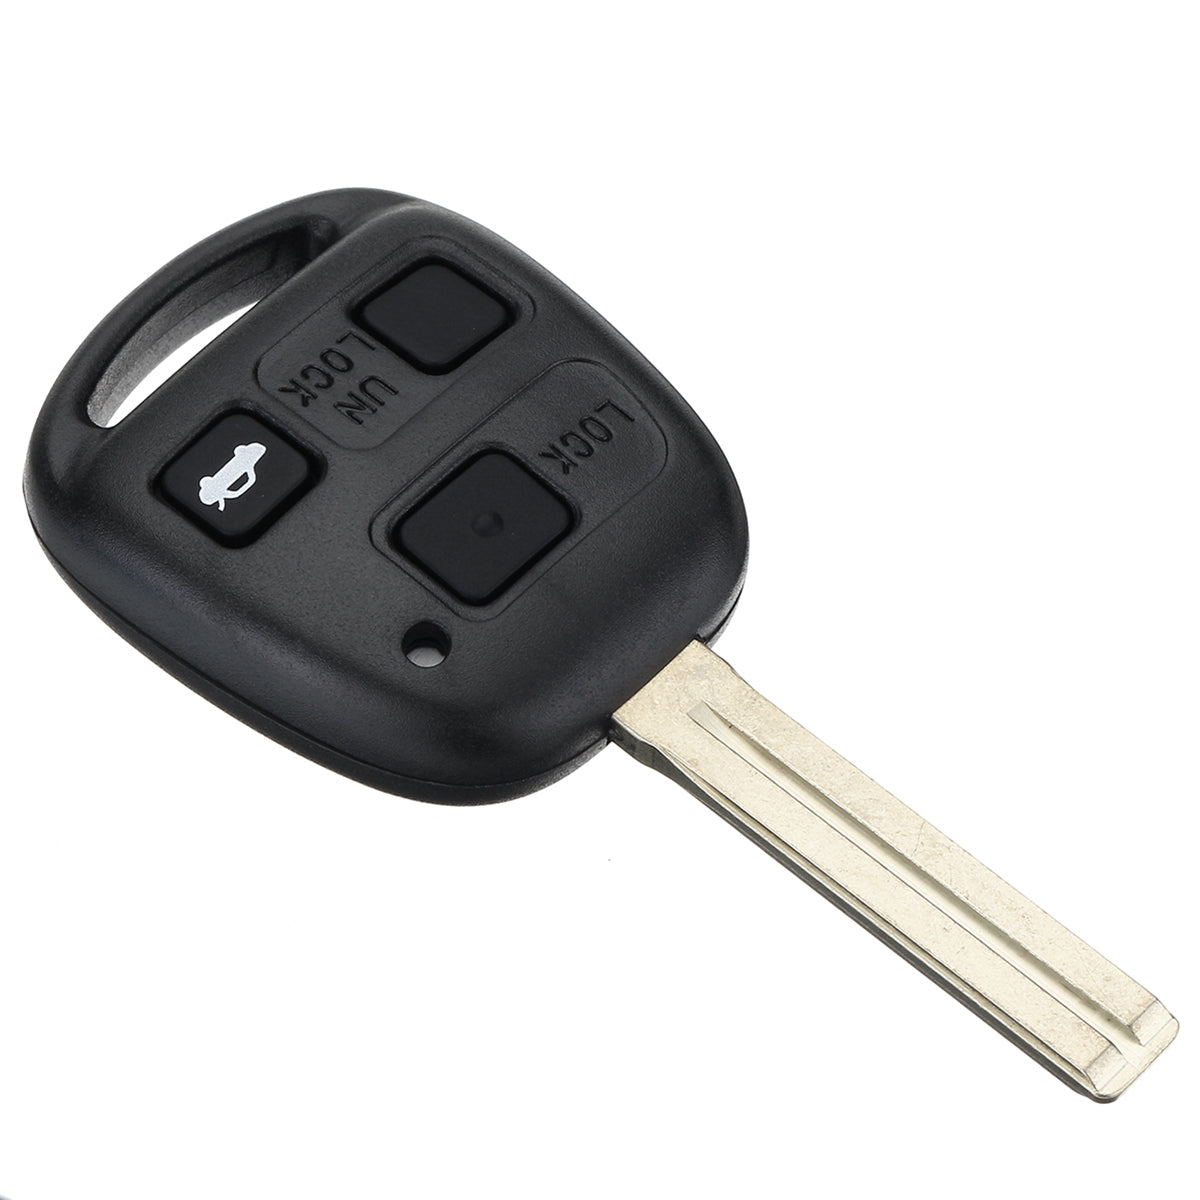 3 Buttons Remote Key Fob Case Shell w/ Battery For Lexus IS200 GS300 LS400 RX300 - Auto GoShop